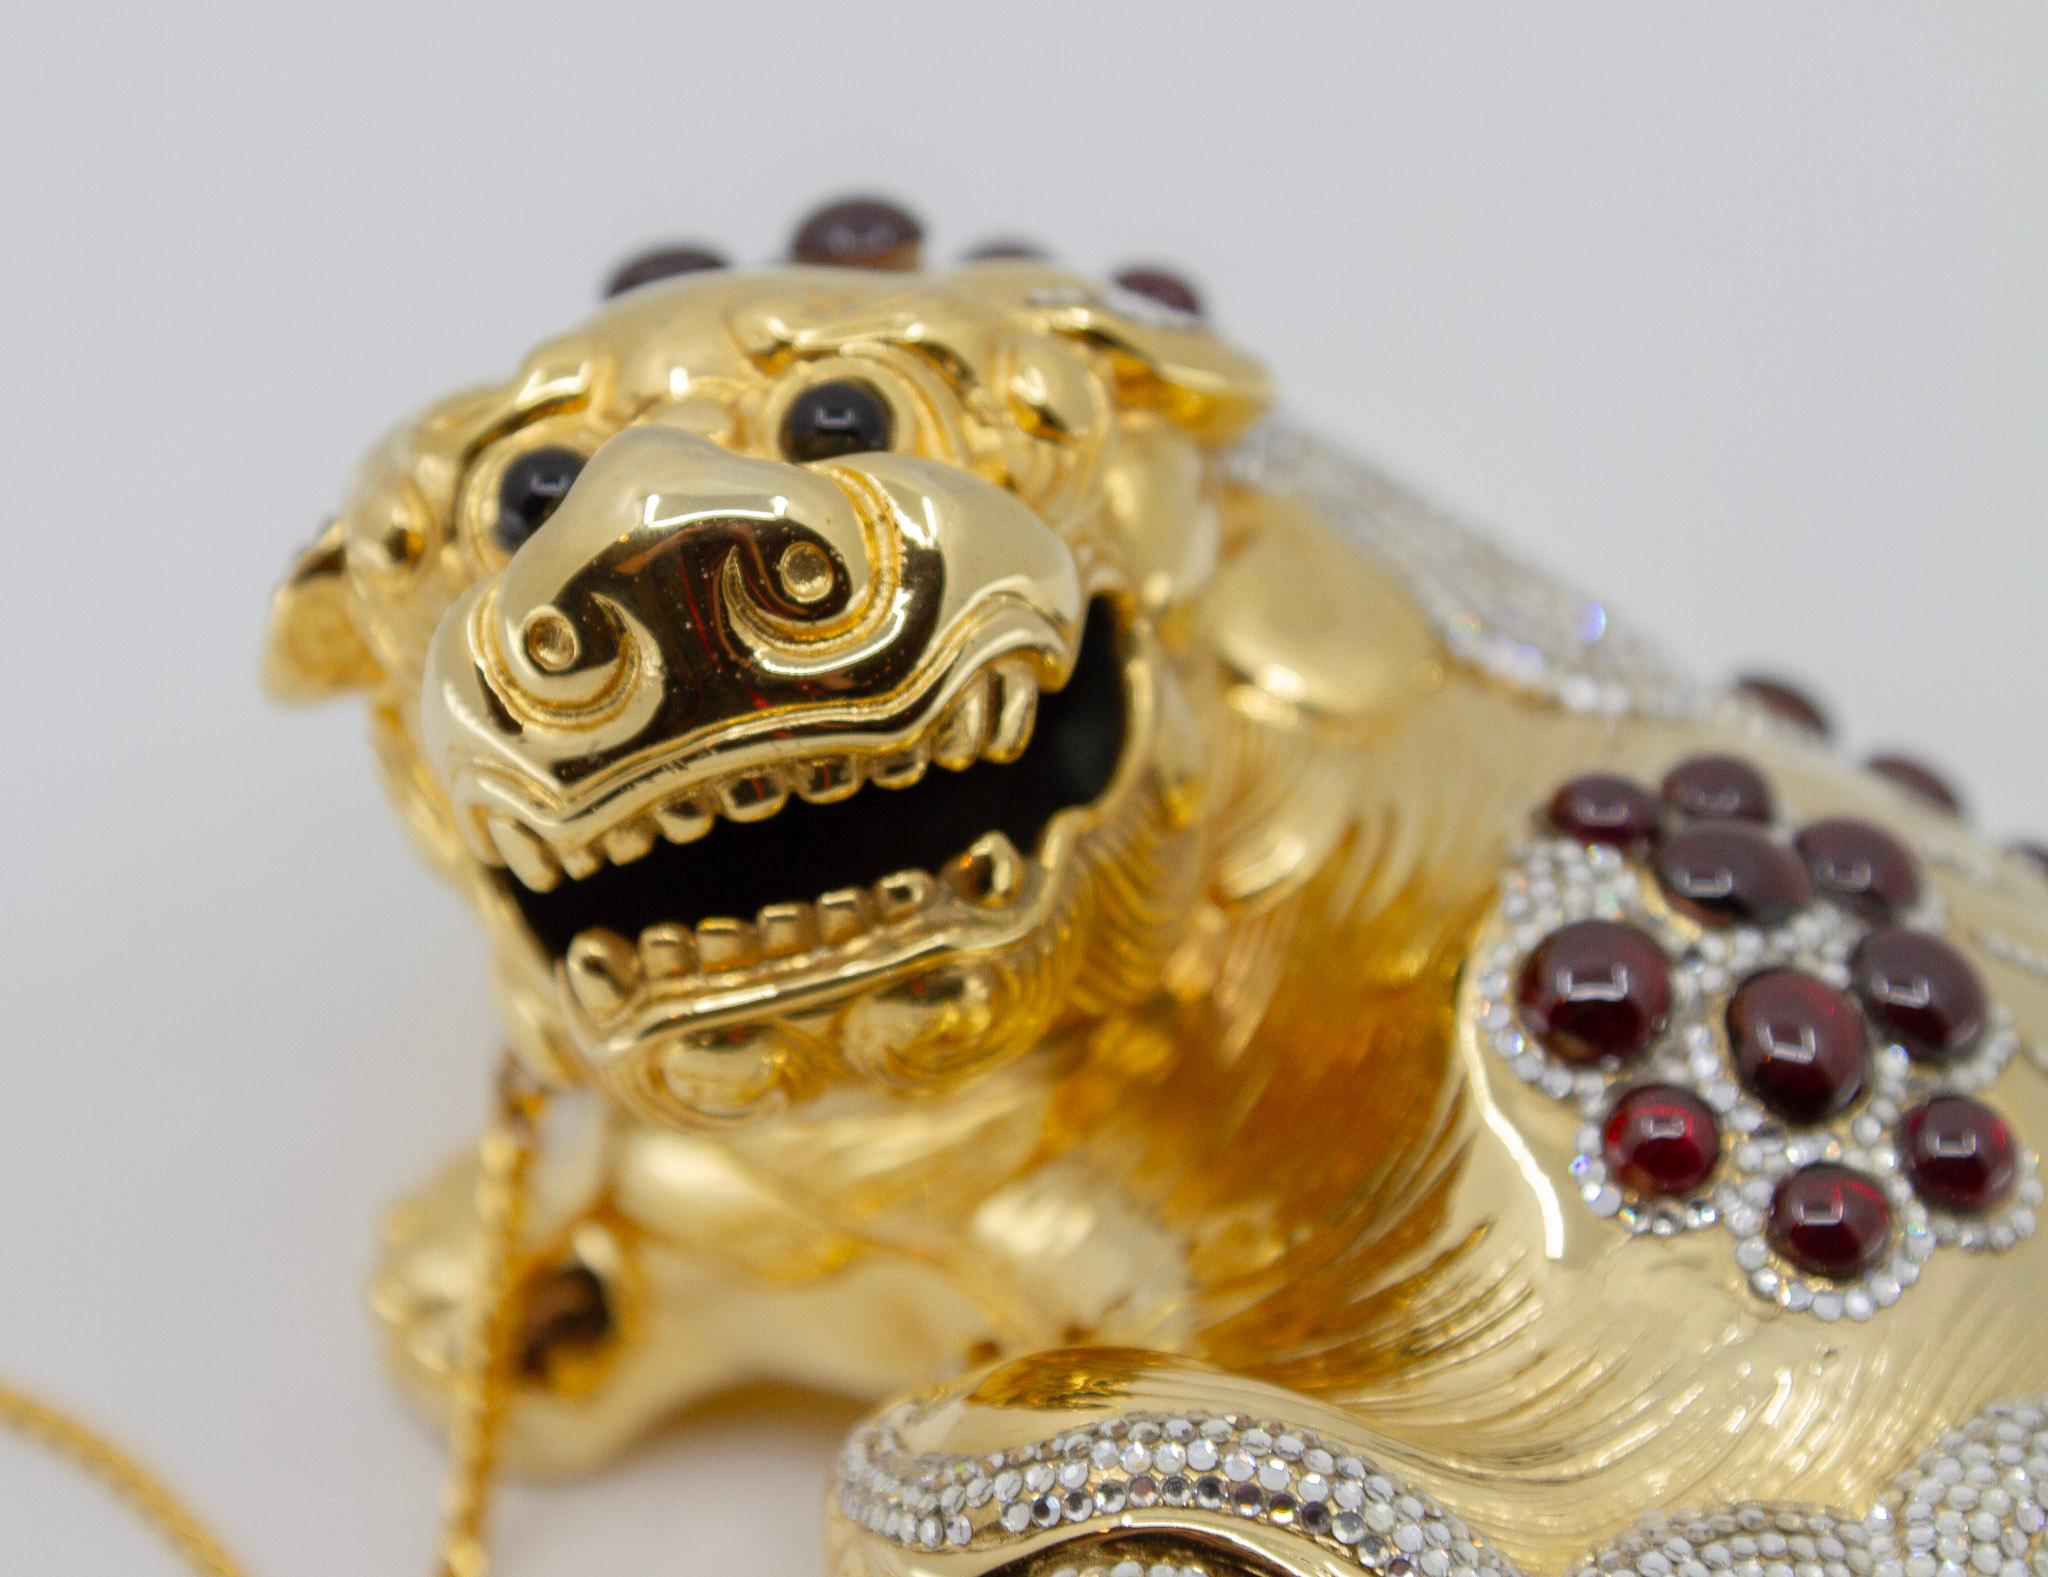 Judith Leiber Couture, United States. Chinese Ming foo dog gold-tone metal minaudiere clutch bag. With applied Swarovski crystals and cabochon garnets. The interior with gold leather, label, and gold-tone metal shoulder strap. 

Comes with miniature